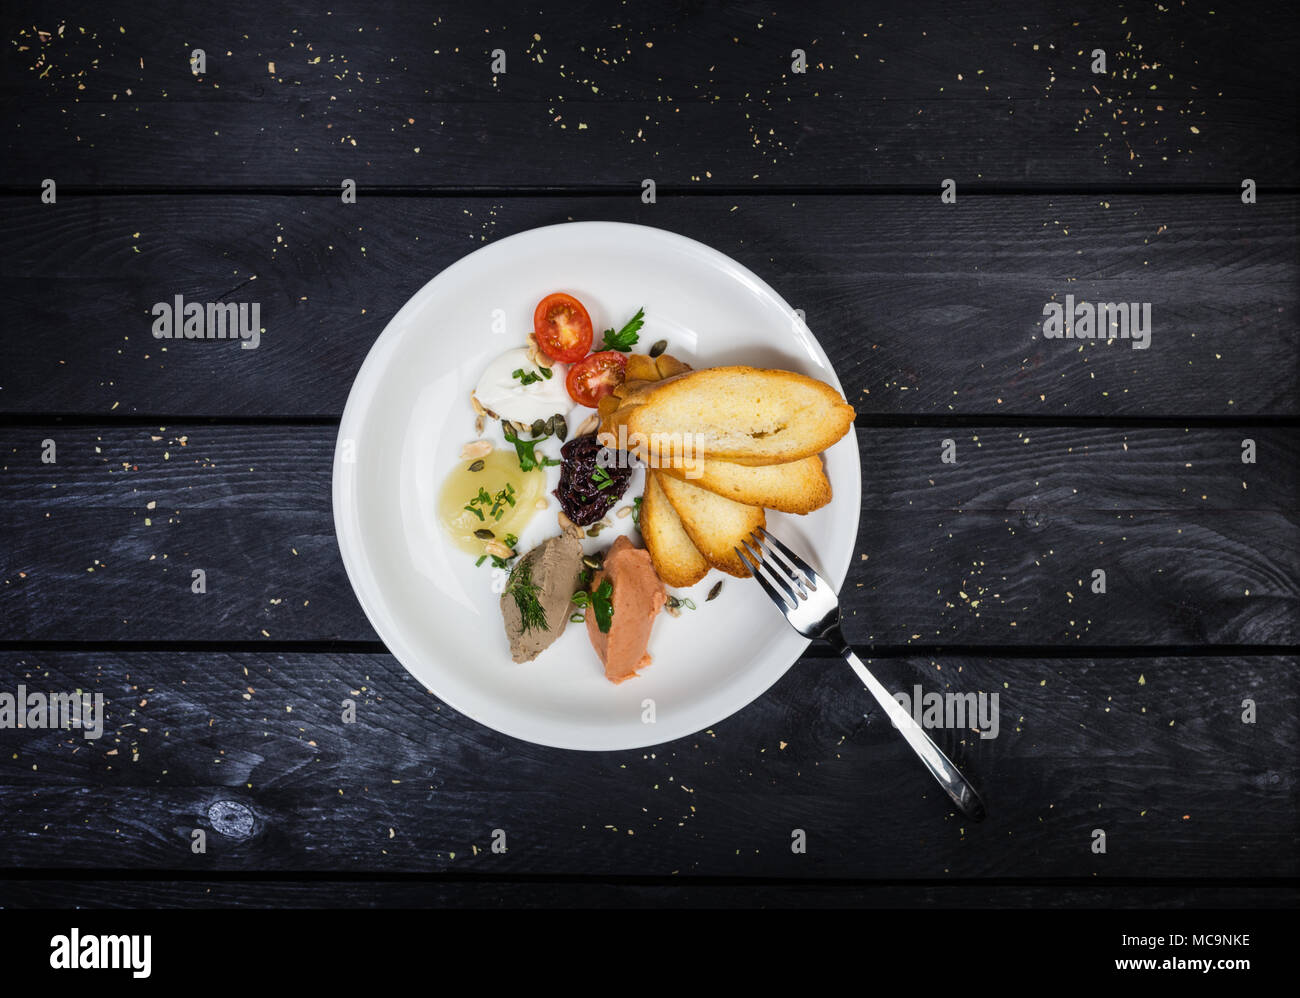 Assorted pates with fried bruschetta served on the white plate with fork on the wooden background. Top view. Stock Photo